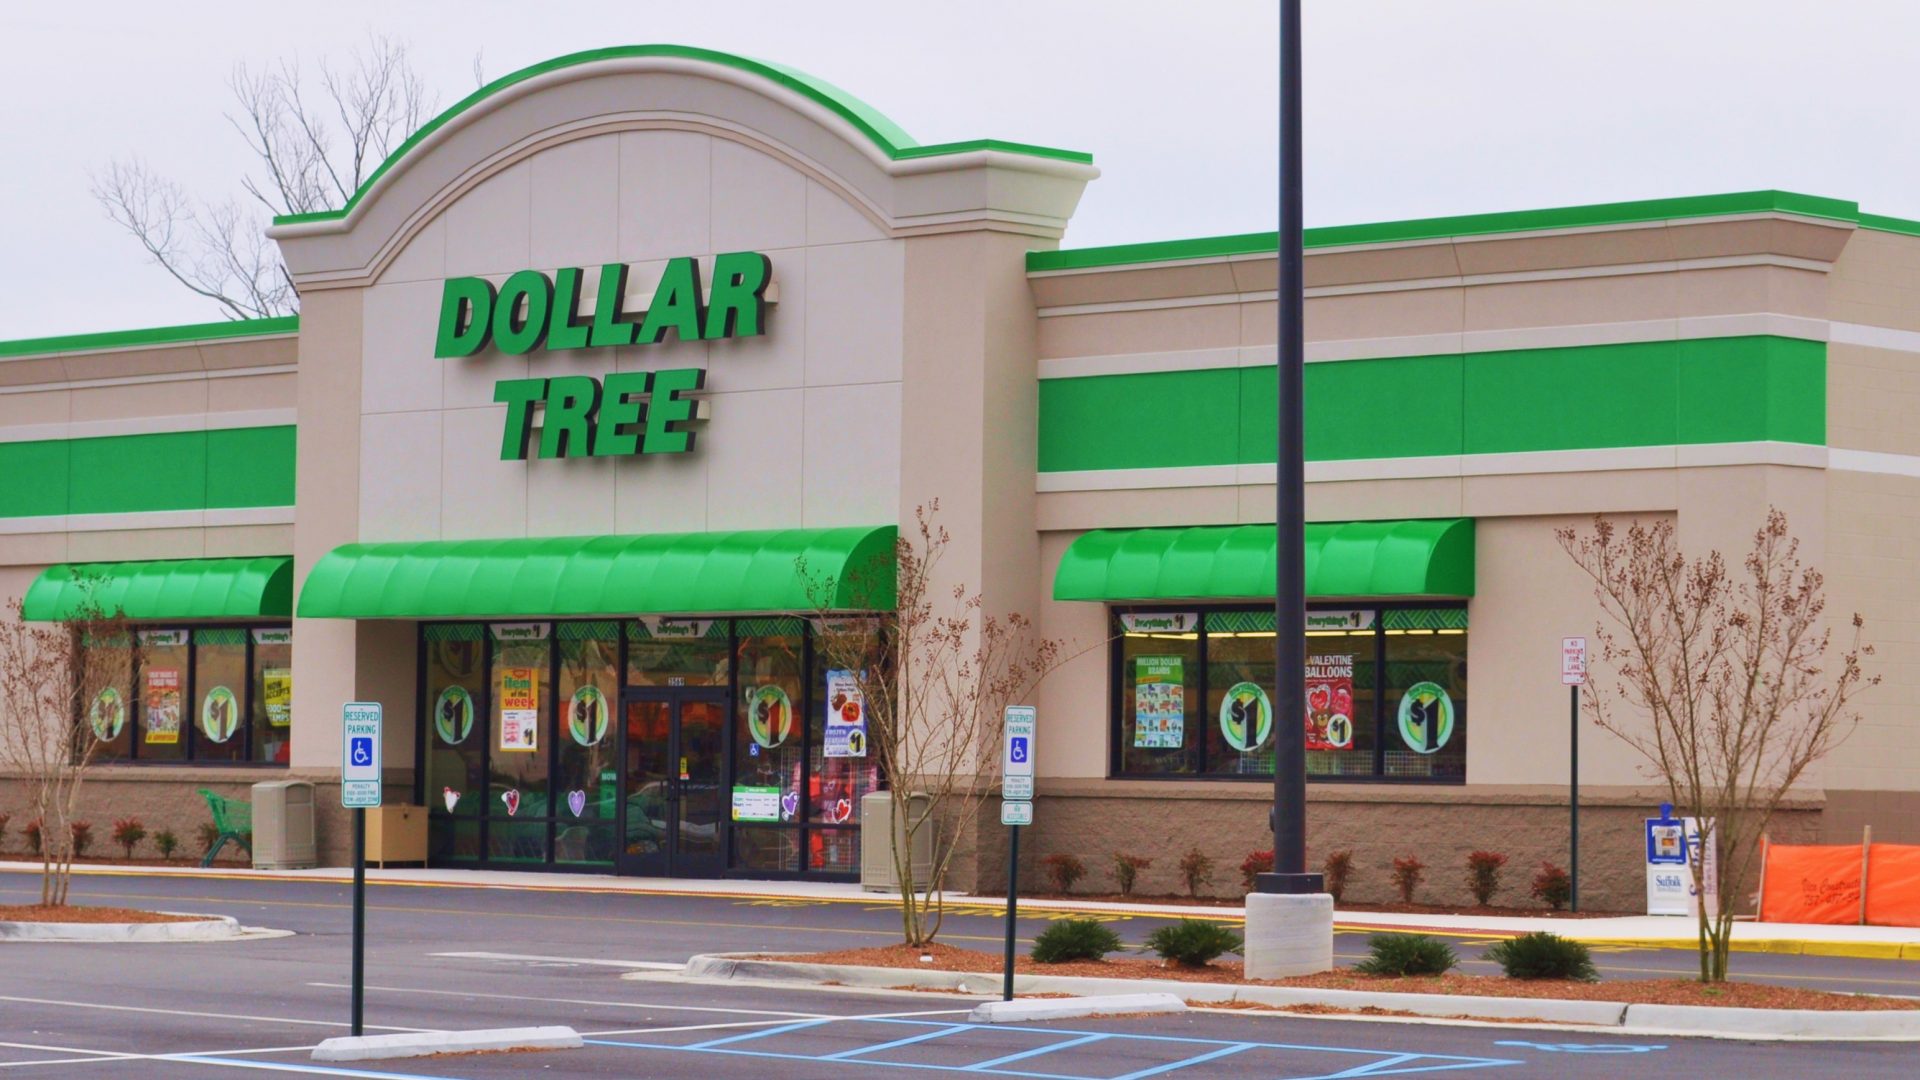 Dollar Tree to close up to 390 Family Dollar stores, reports $2.3